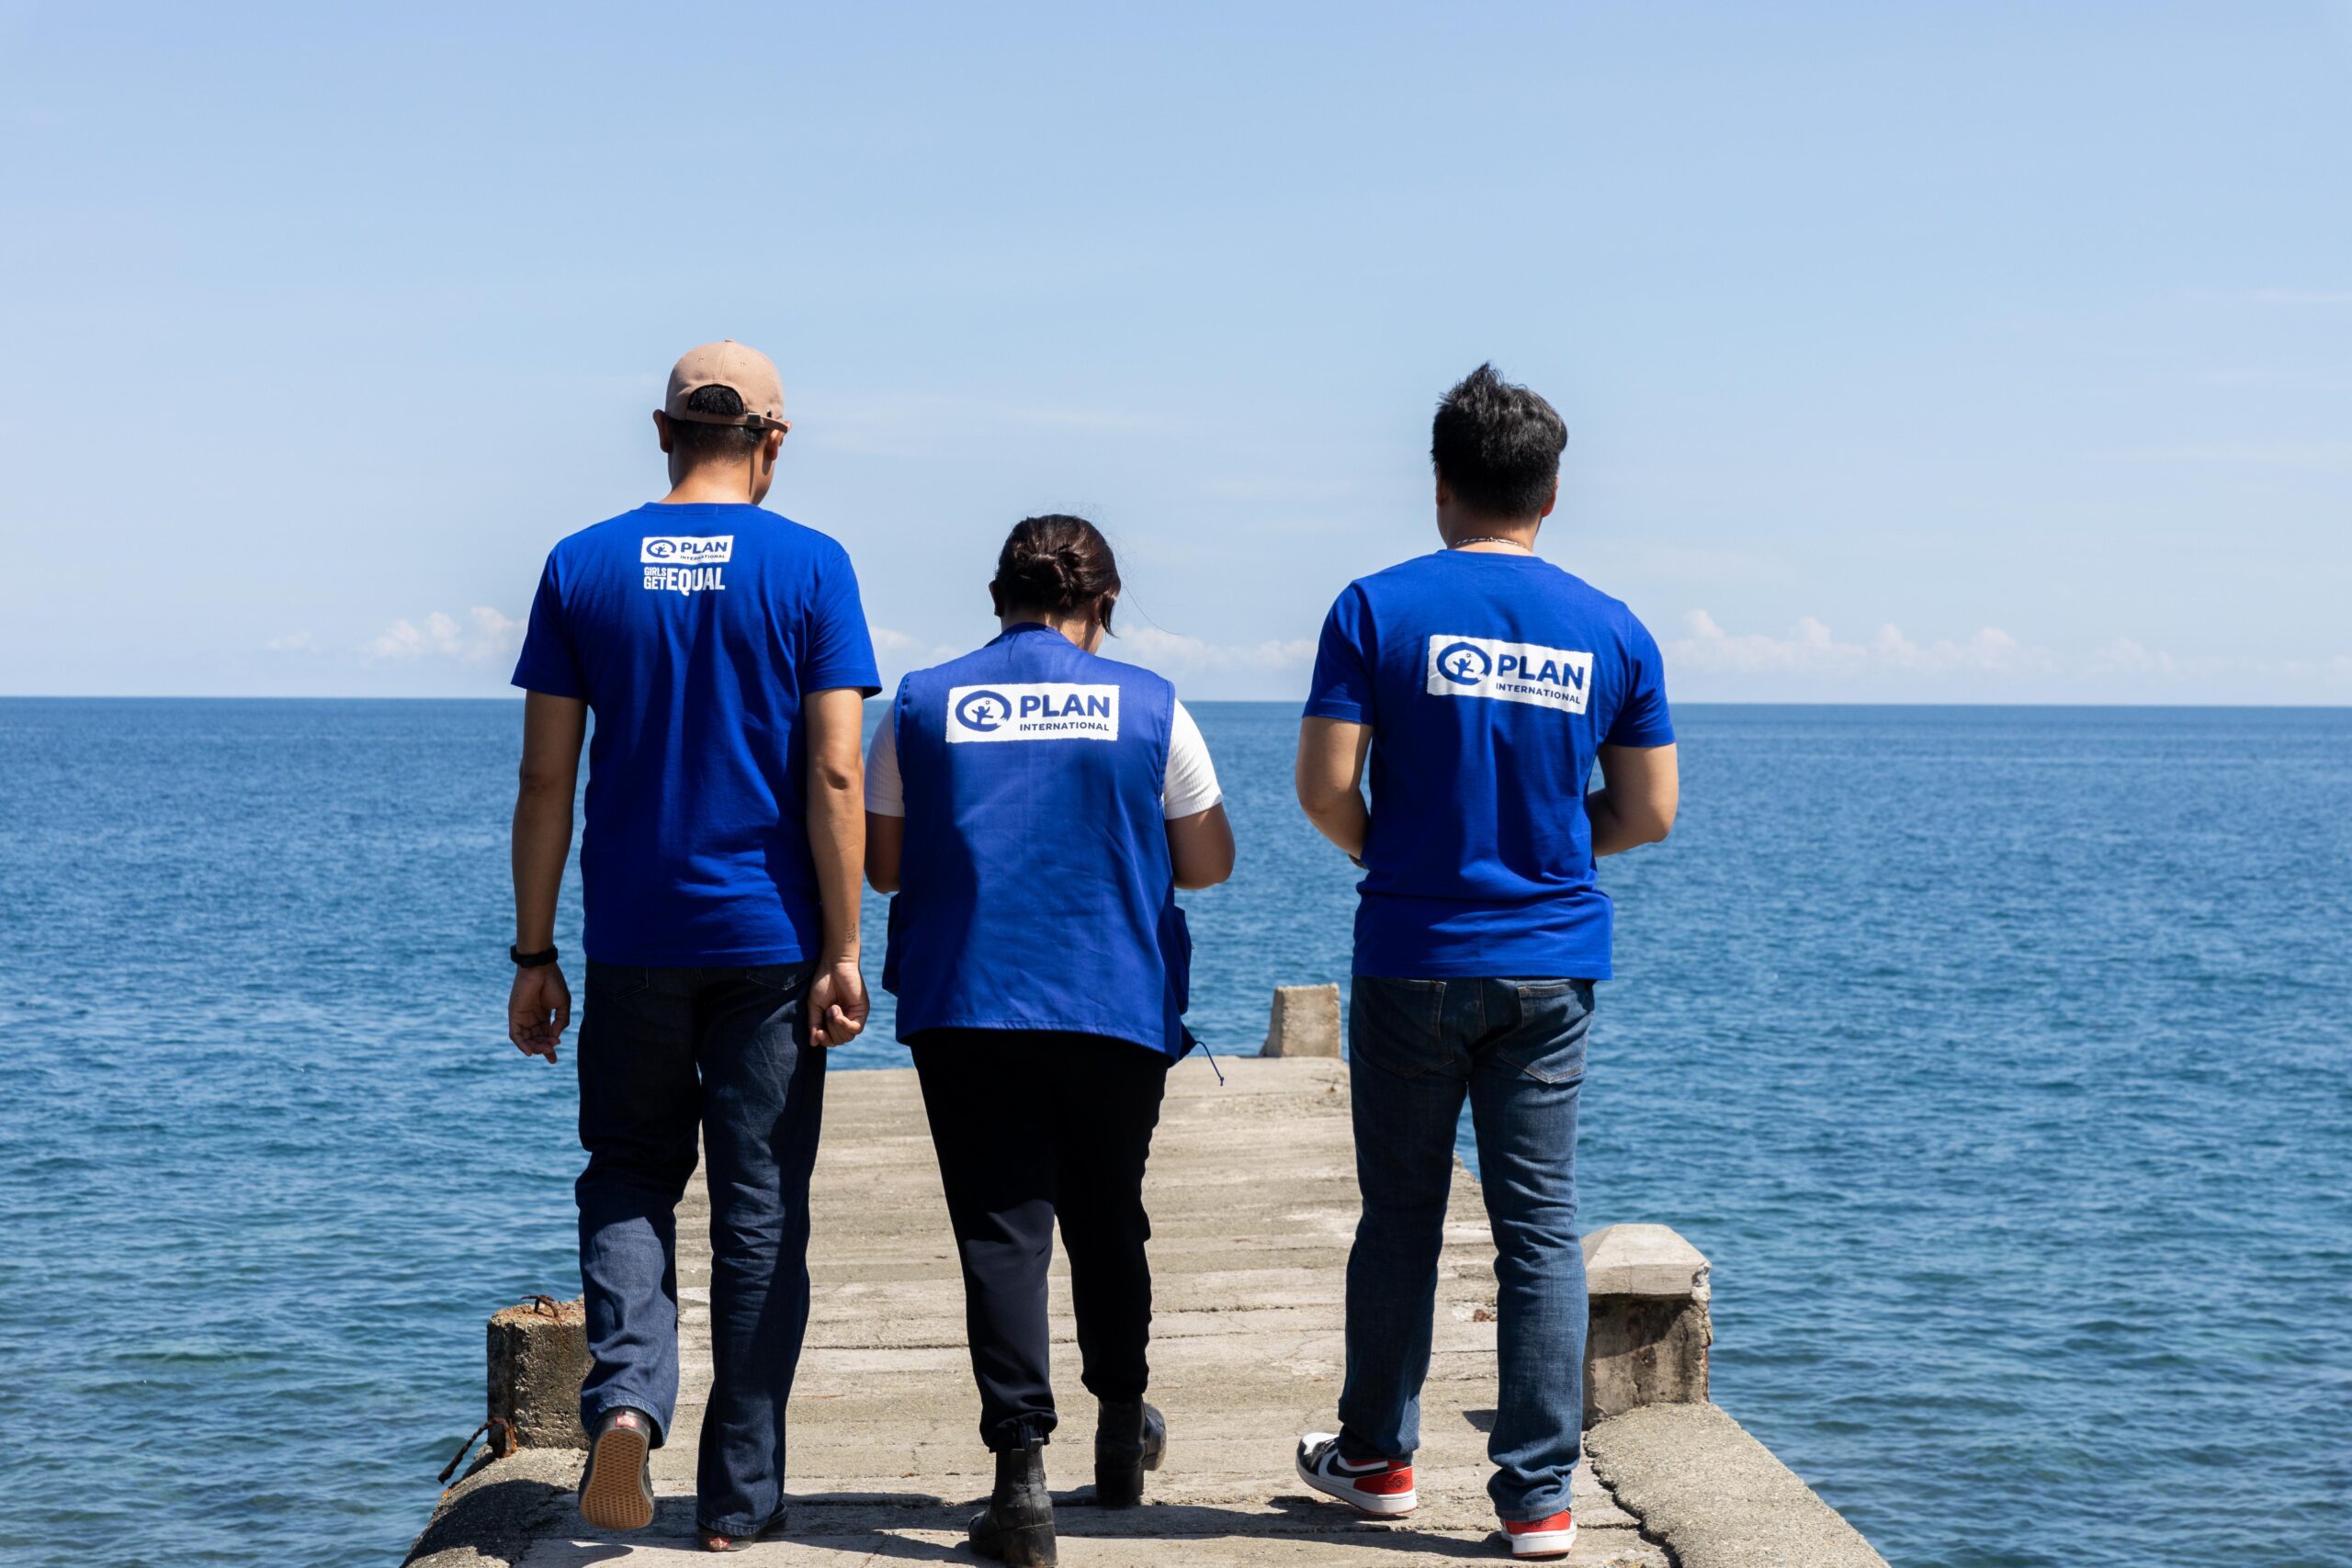 Three Plan International staff members stand on a board walk above the sea in Plan International branded clothing